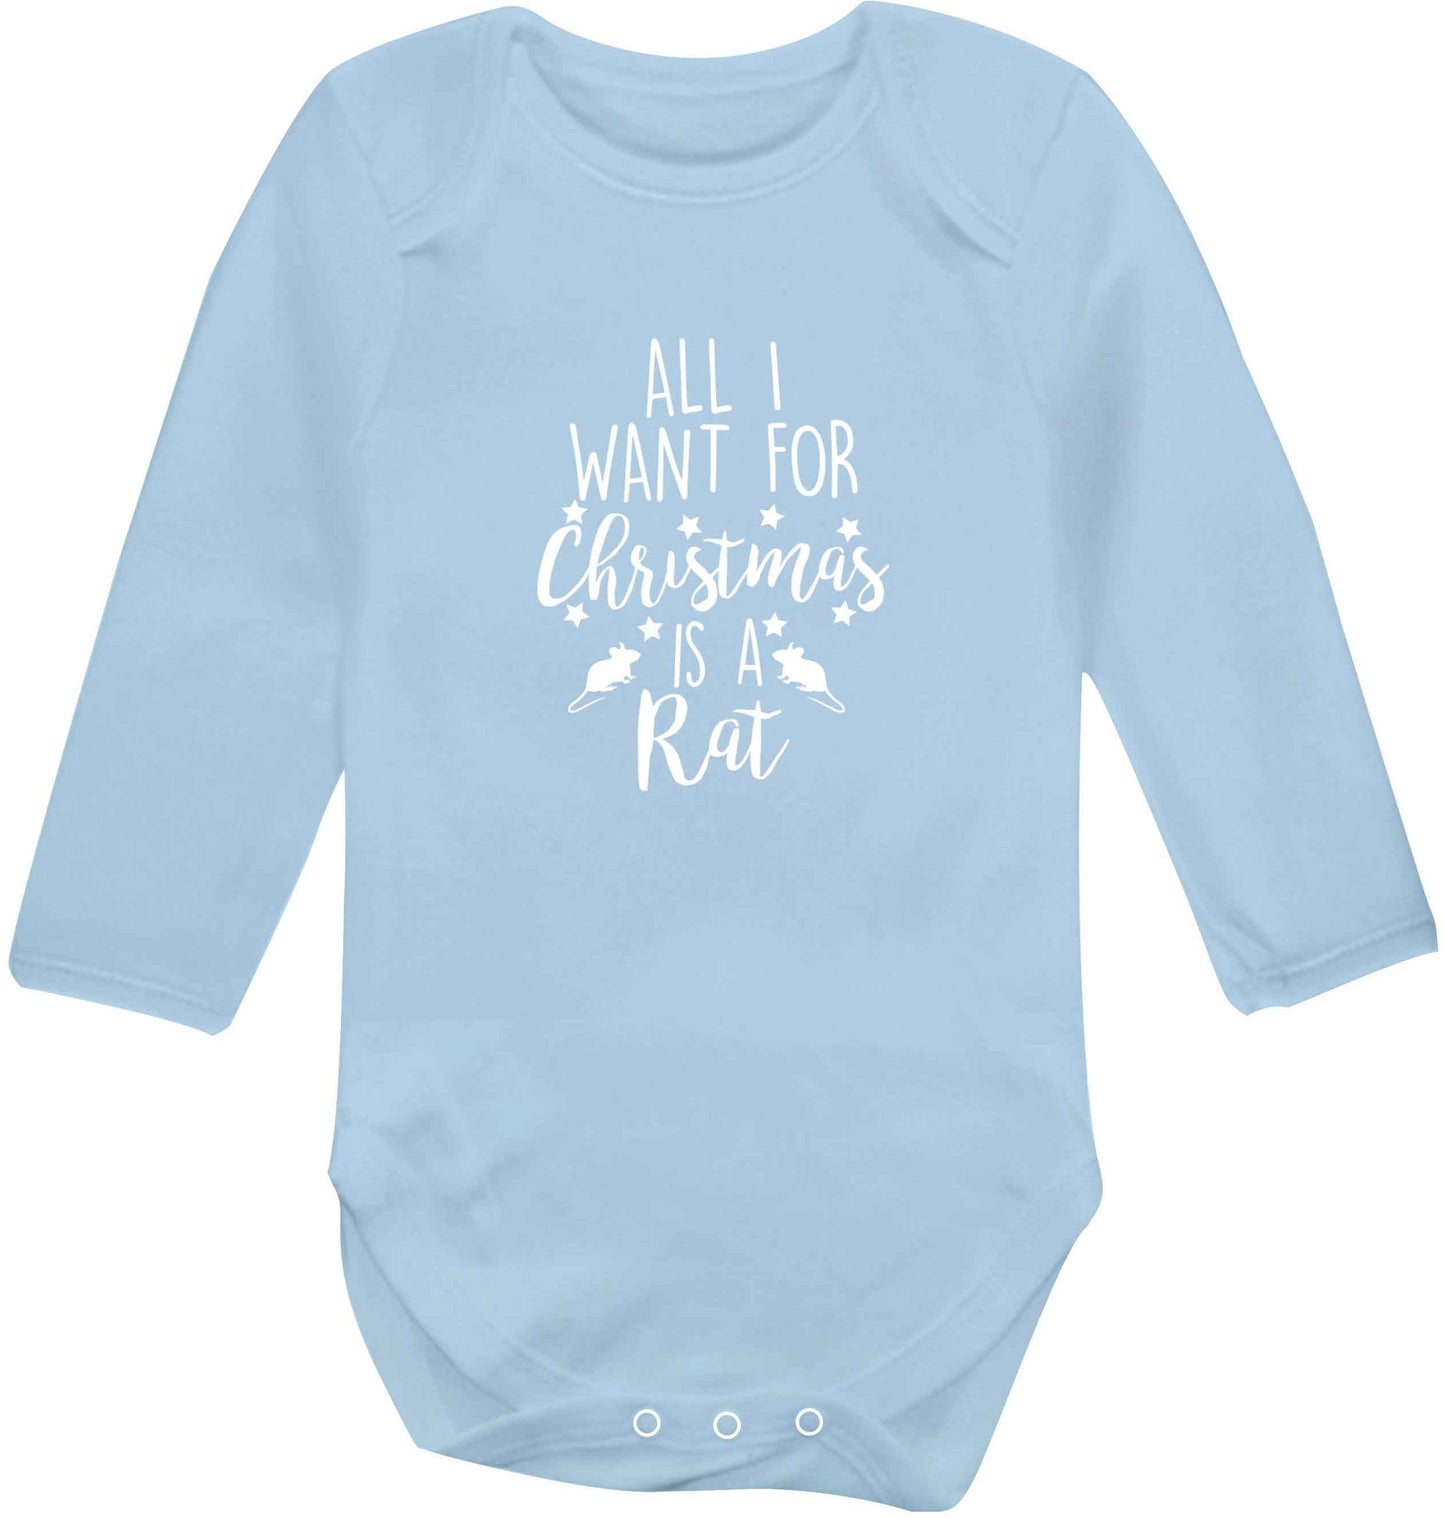 All I want for Christmas is a rat baby vest long sleeved pale blue 6-12 months